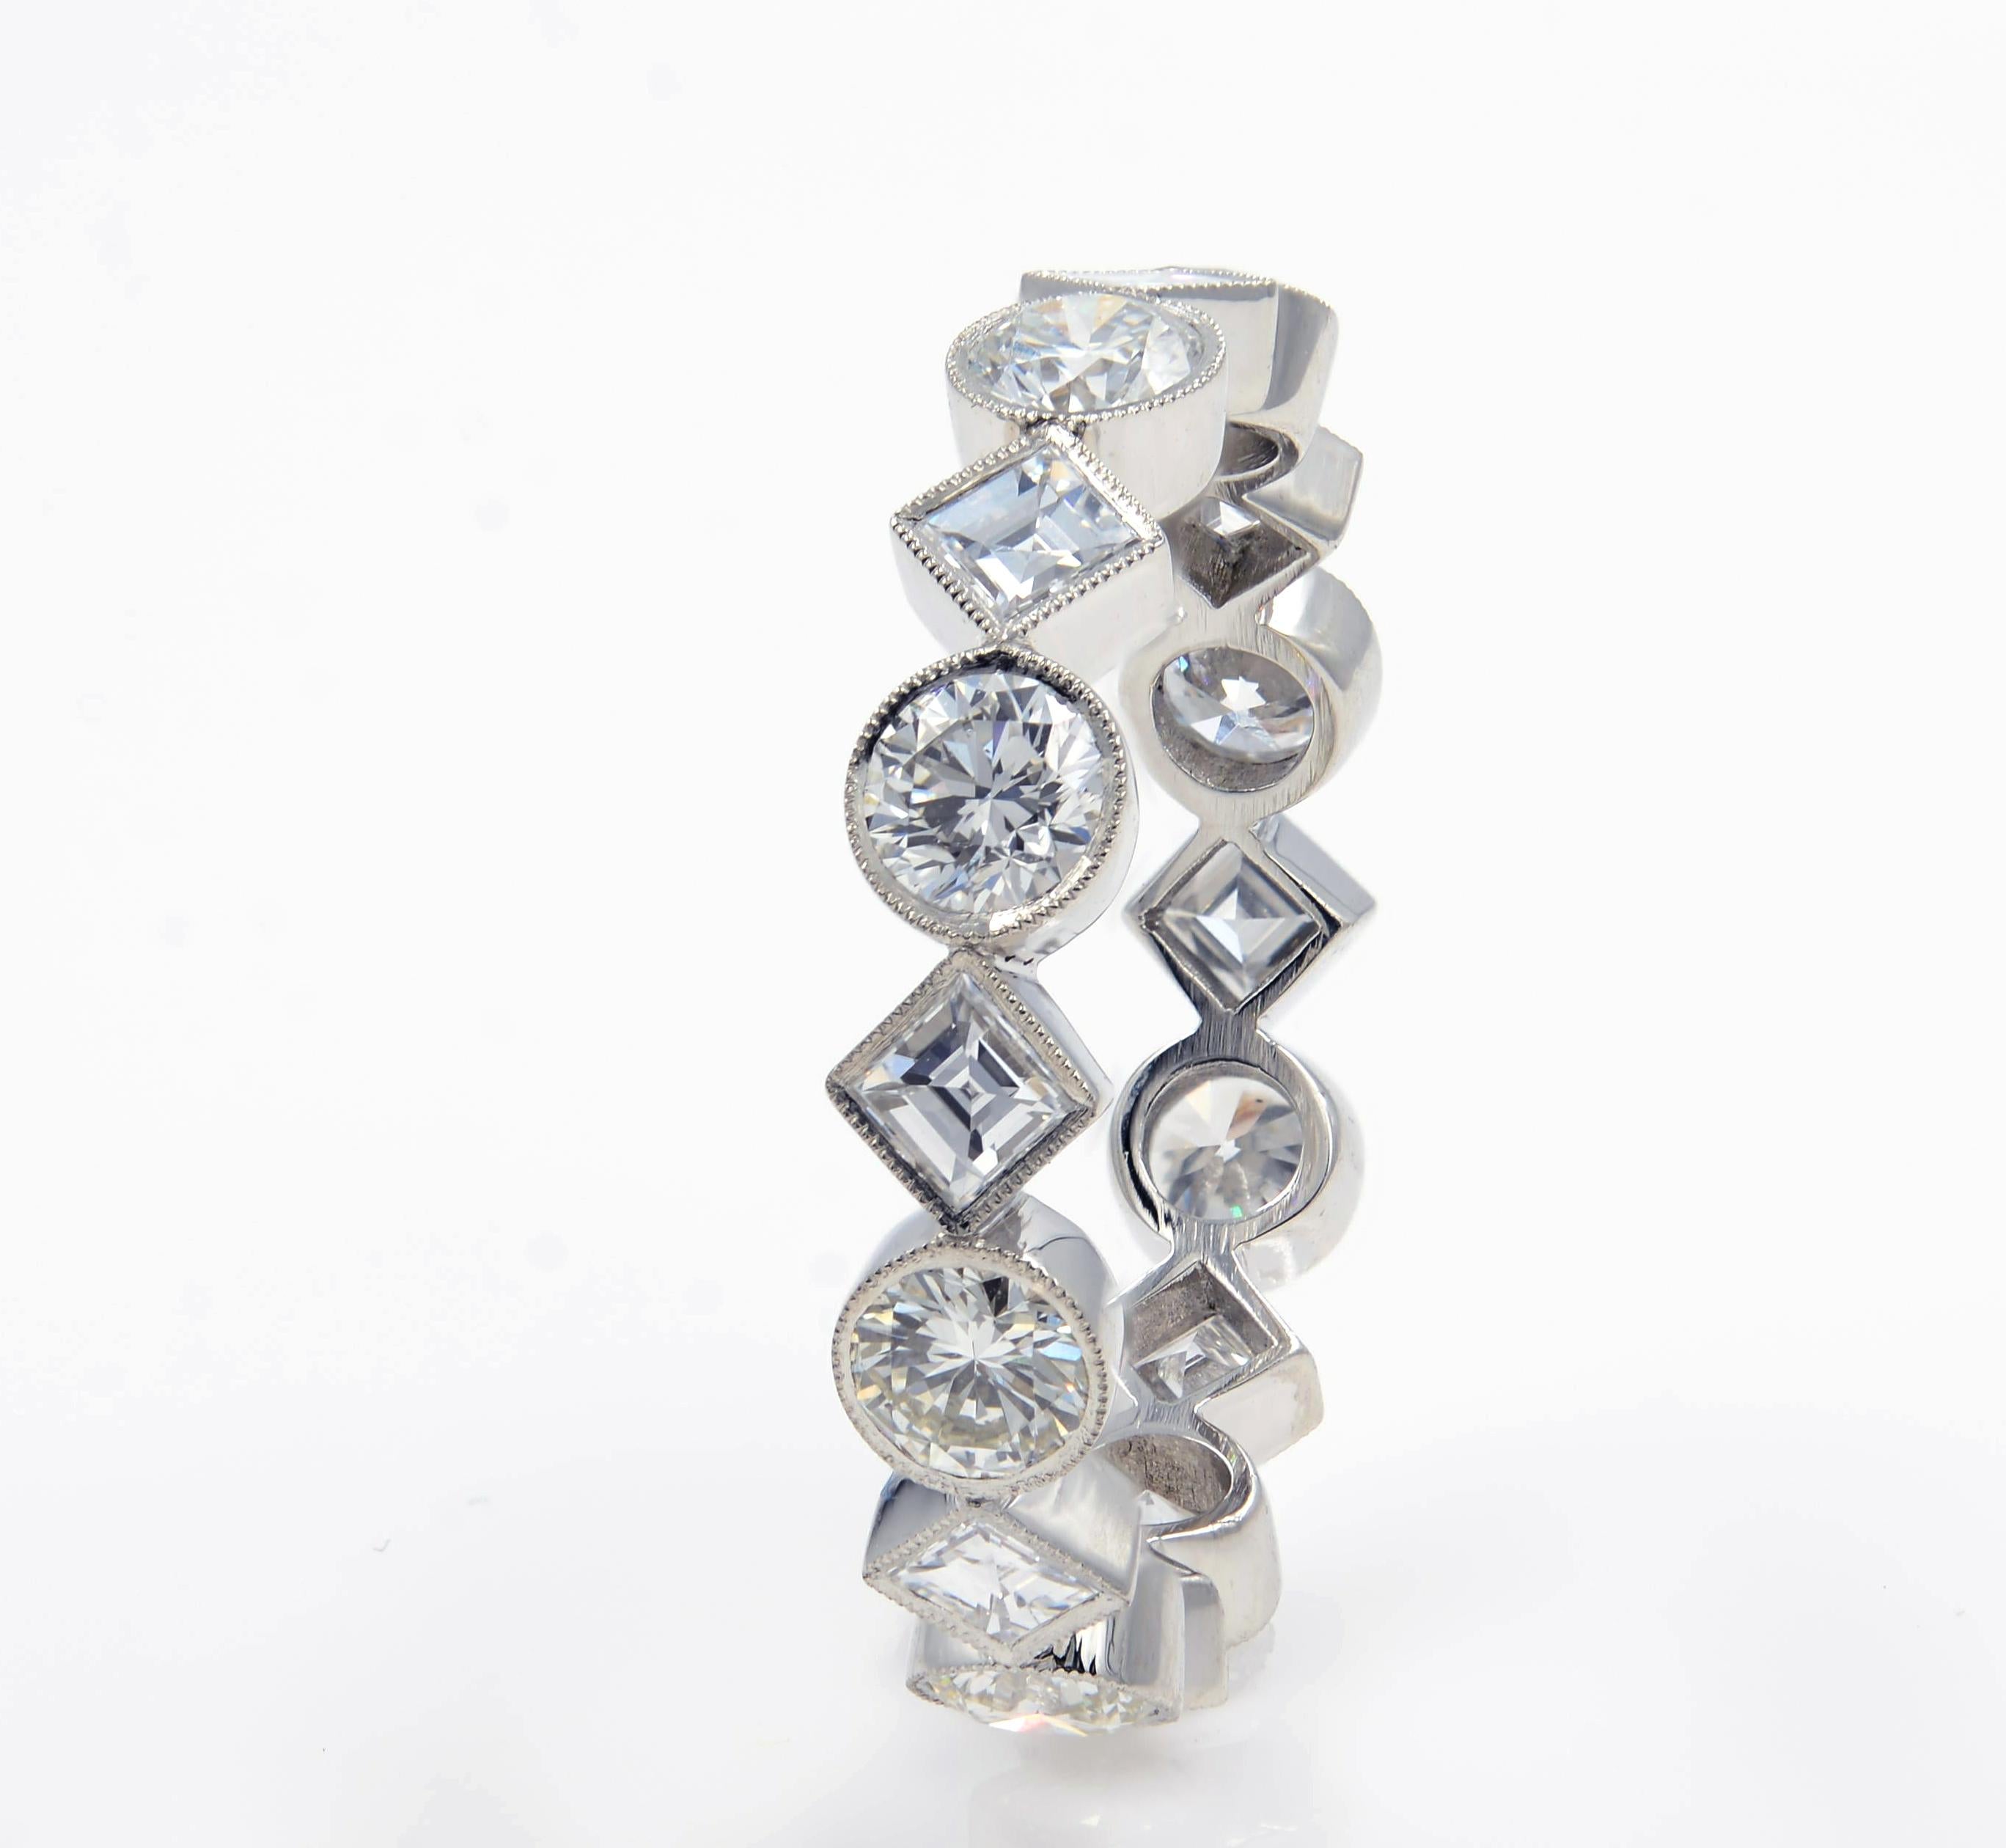 Just under 2.00 carats of glittering carre cut and round diamonds are set into this desirable and unique slim eternity band. The diamonds are set snugly in a bezel finished with fine milgrain details and a beautiful open under gallery. This band is